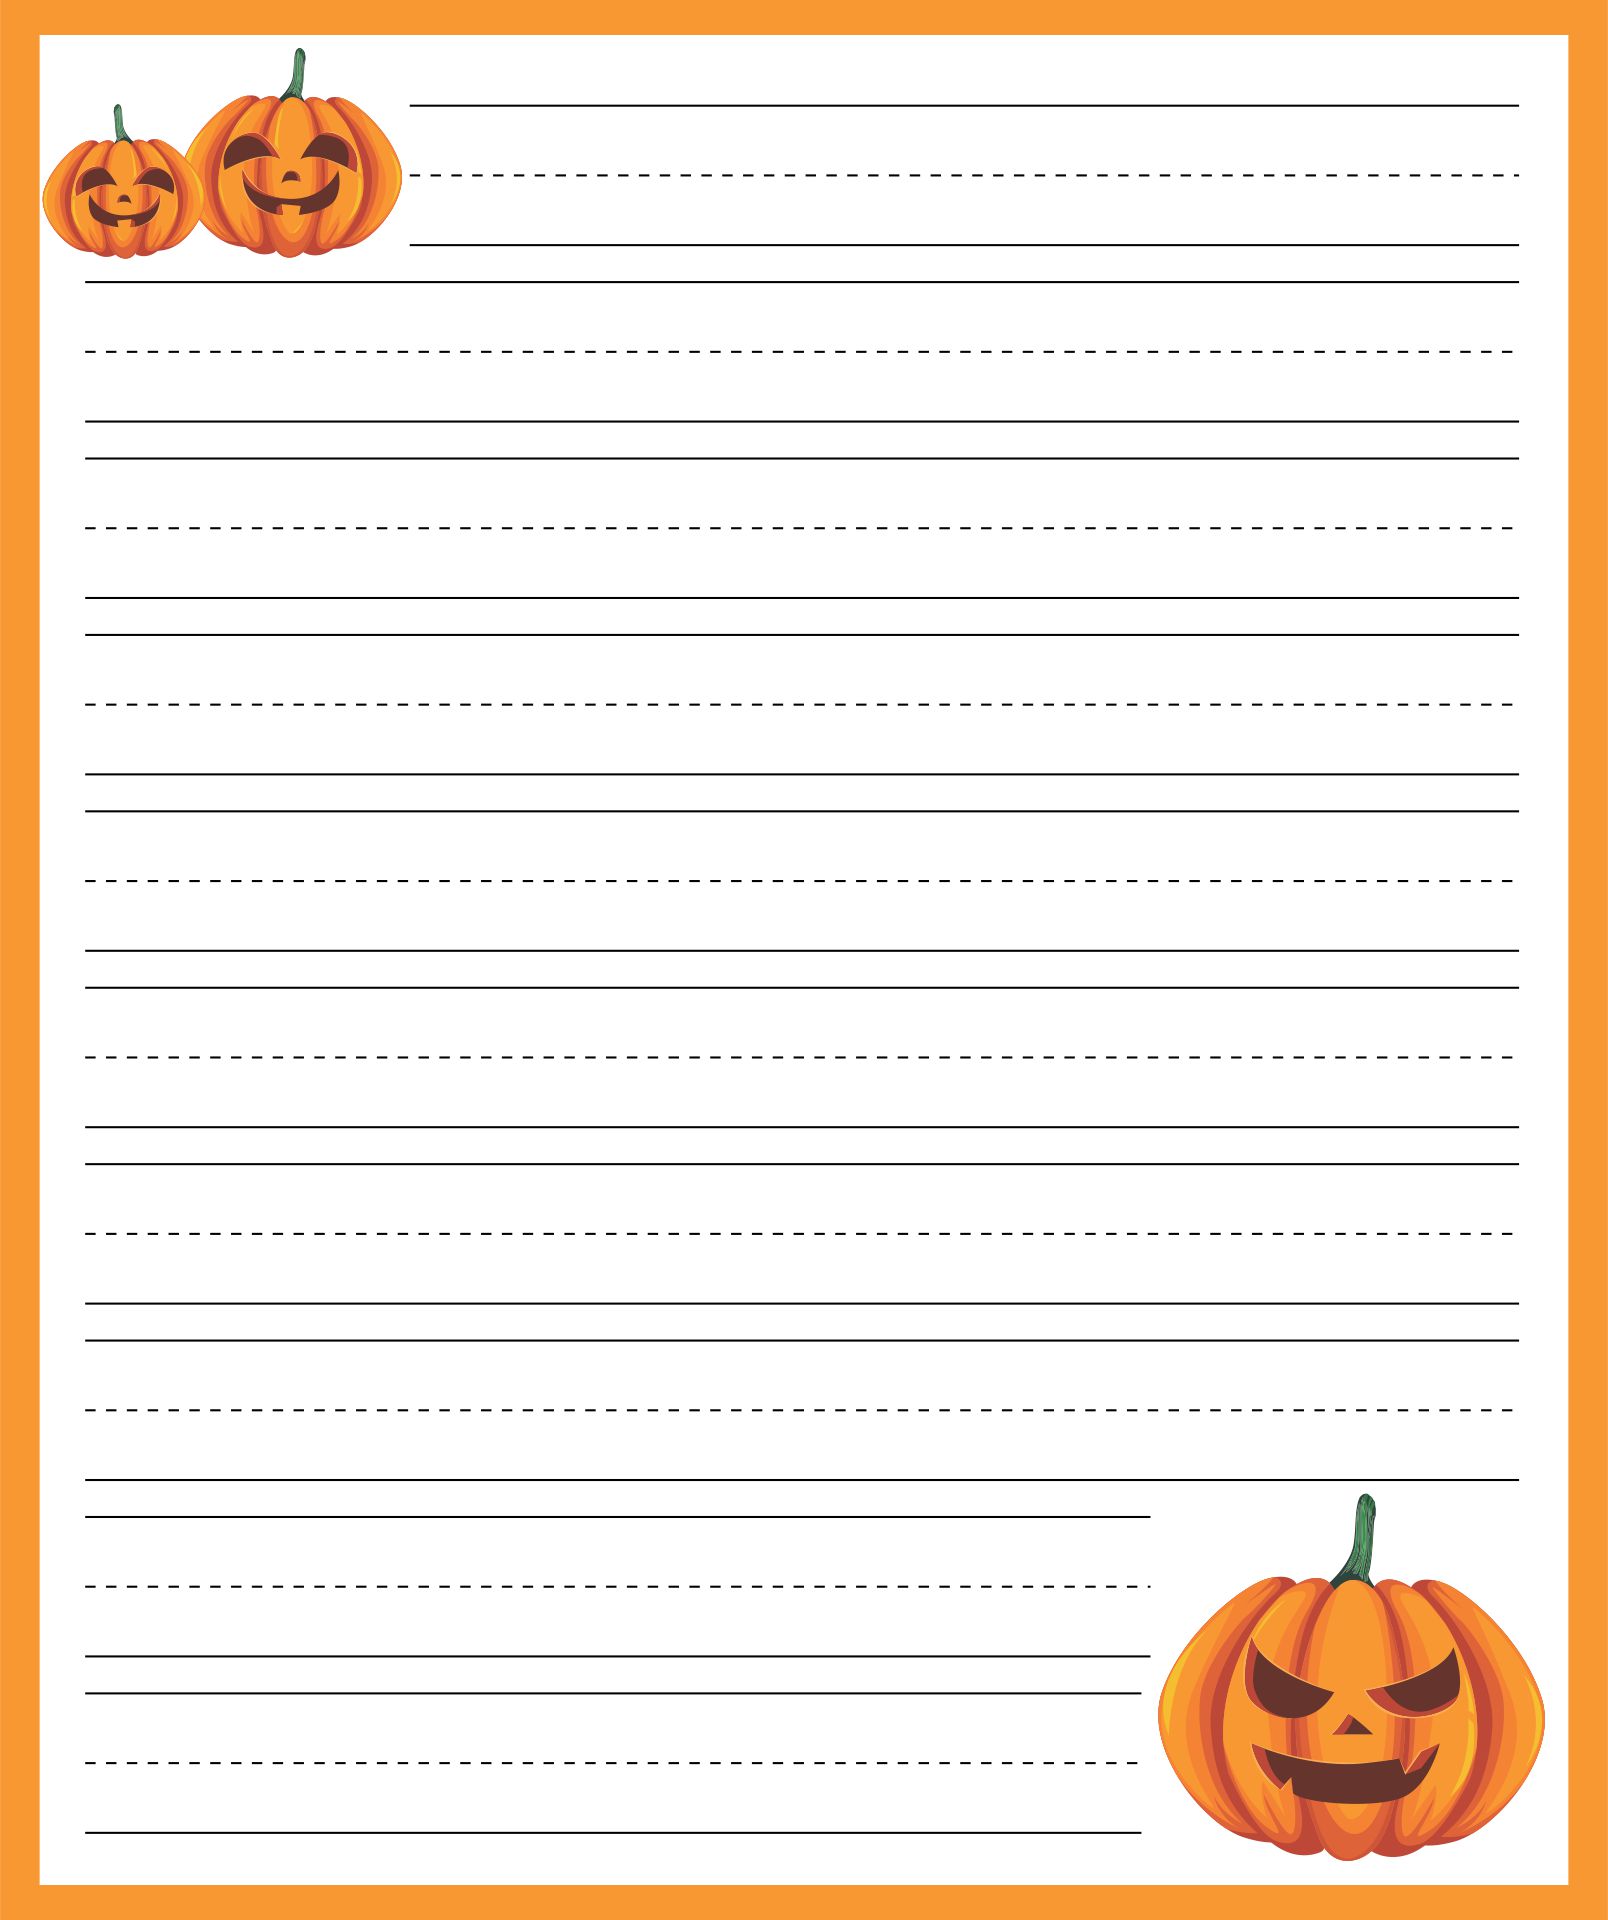  Printable Halloween Lined Writing Paper